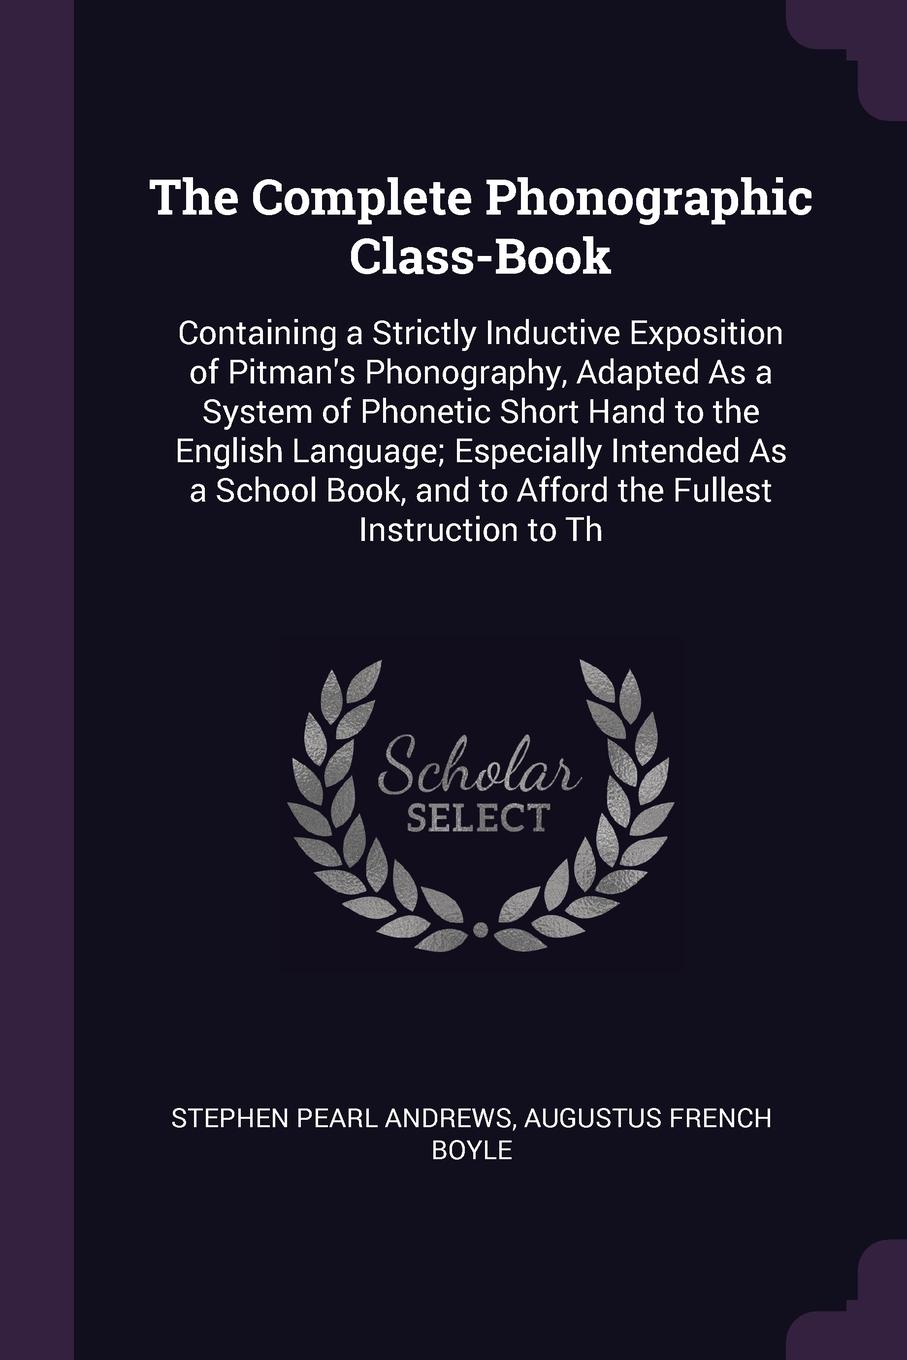 The Complete Phonographic Class-Book. Containing a Strictly Inductive Exposition of Pitman`s Phonography, Adapted As a System of Phonetic Short Hand to the English Language; Especially Intended As a School Book, and to Afford the Fullest Instructi...